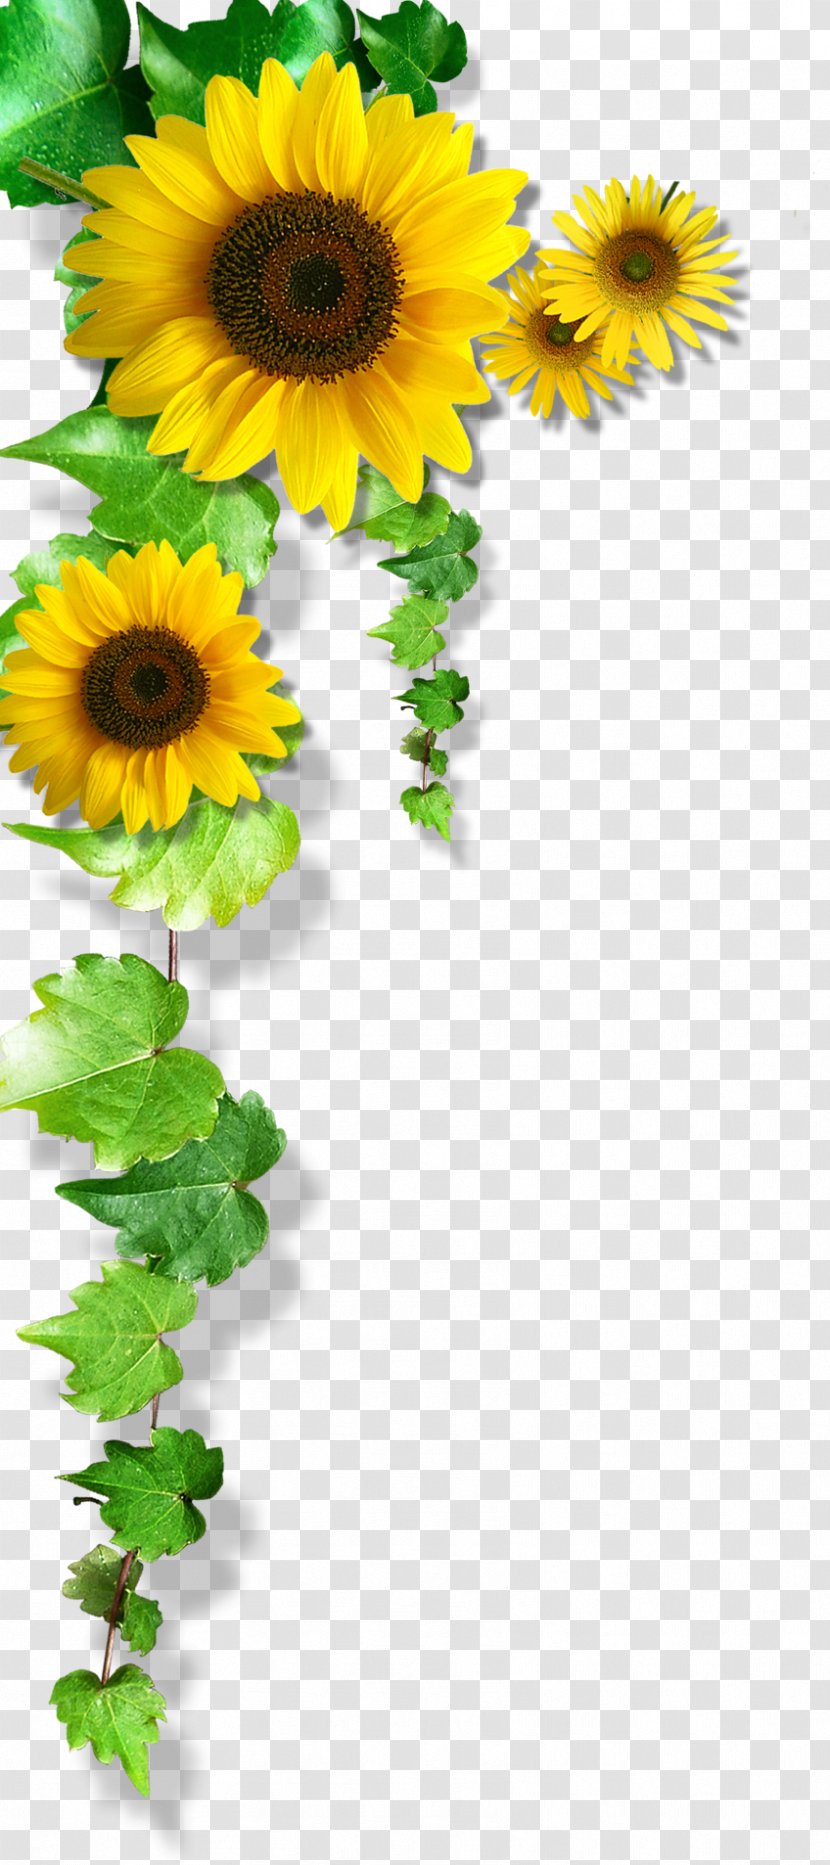 Common Sunflower Download - Yellow Flowers Transparent PNG